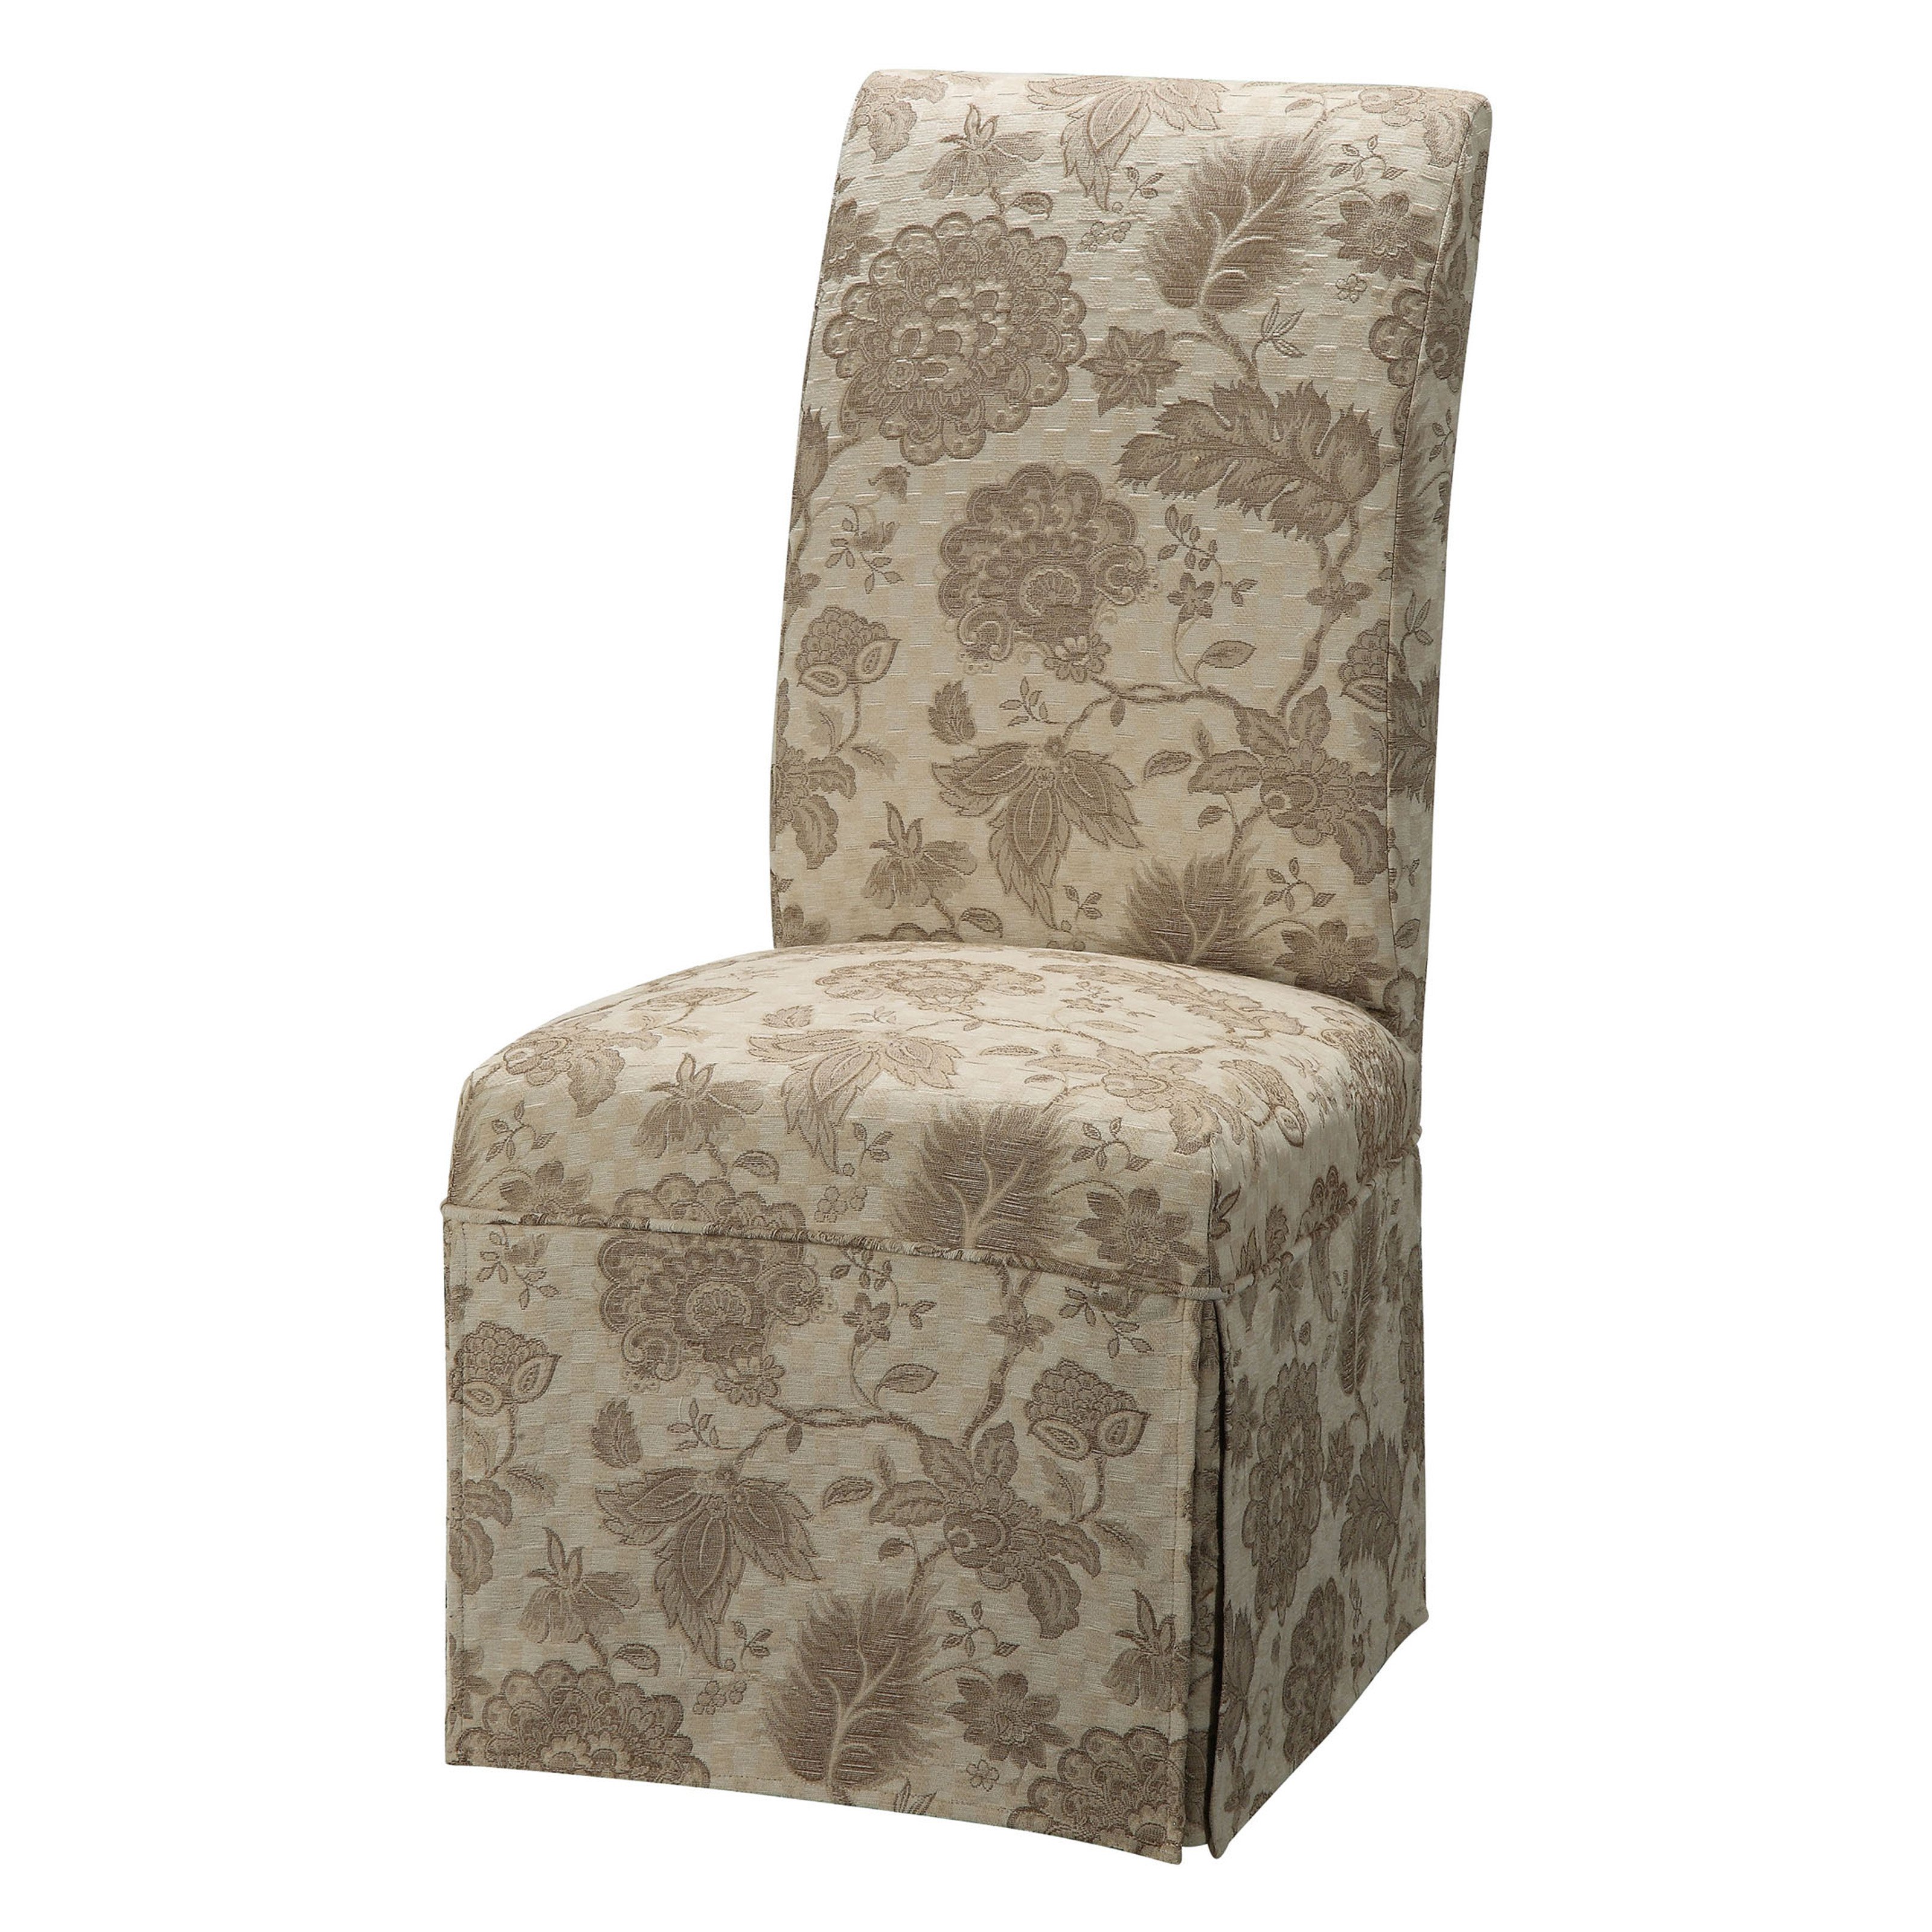 dining room chair cover patterns photo - 1